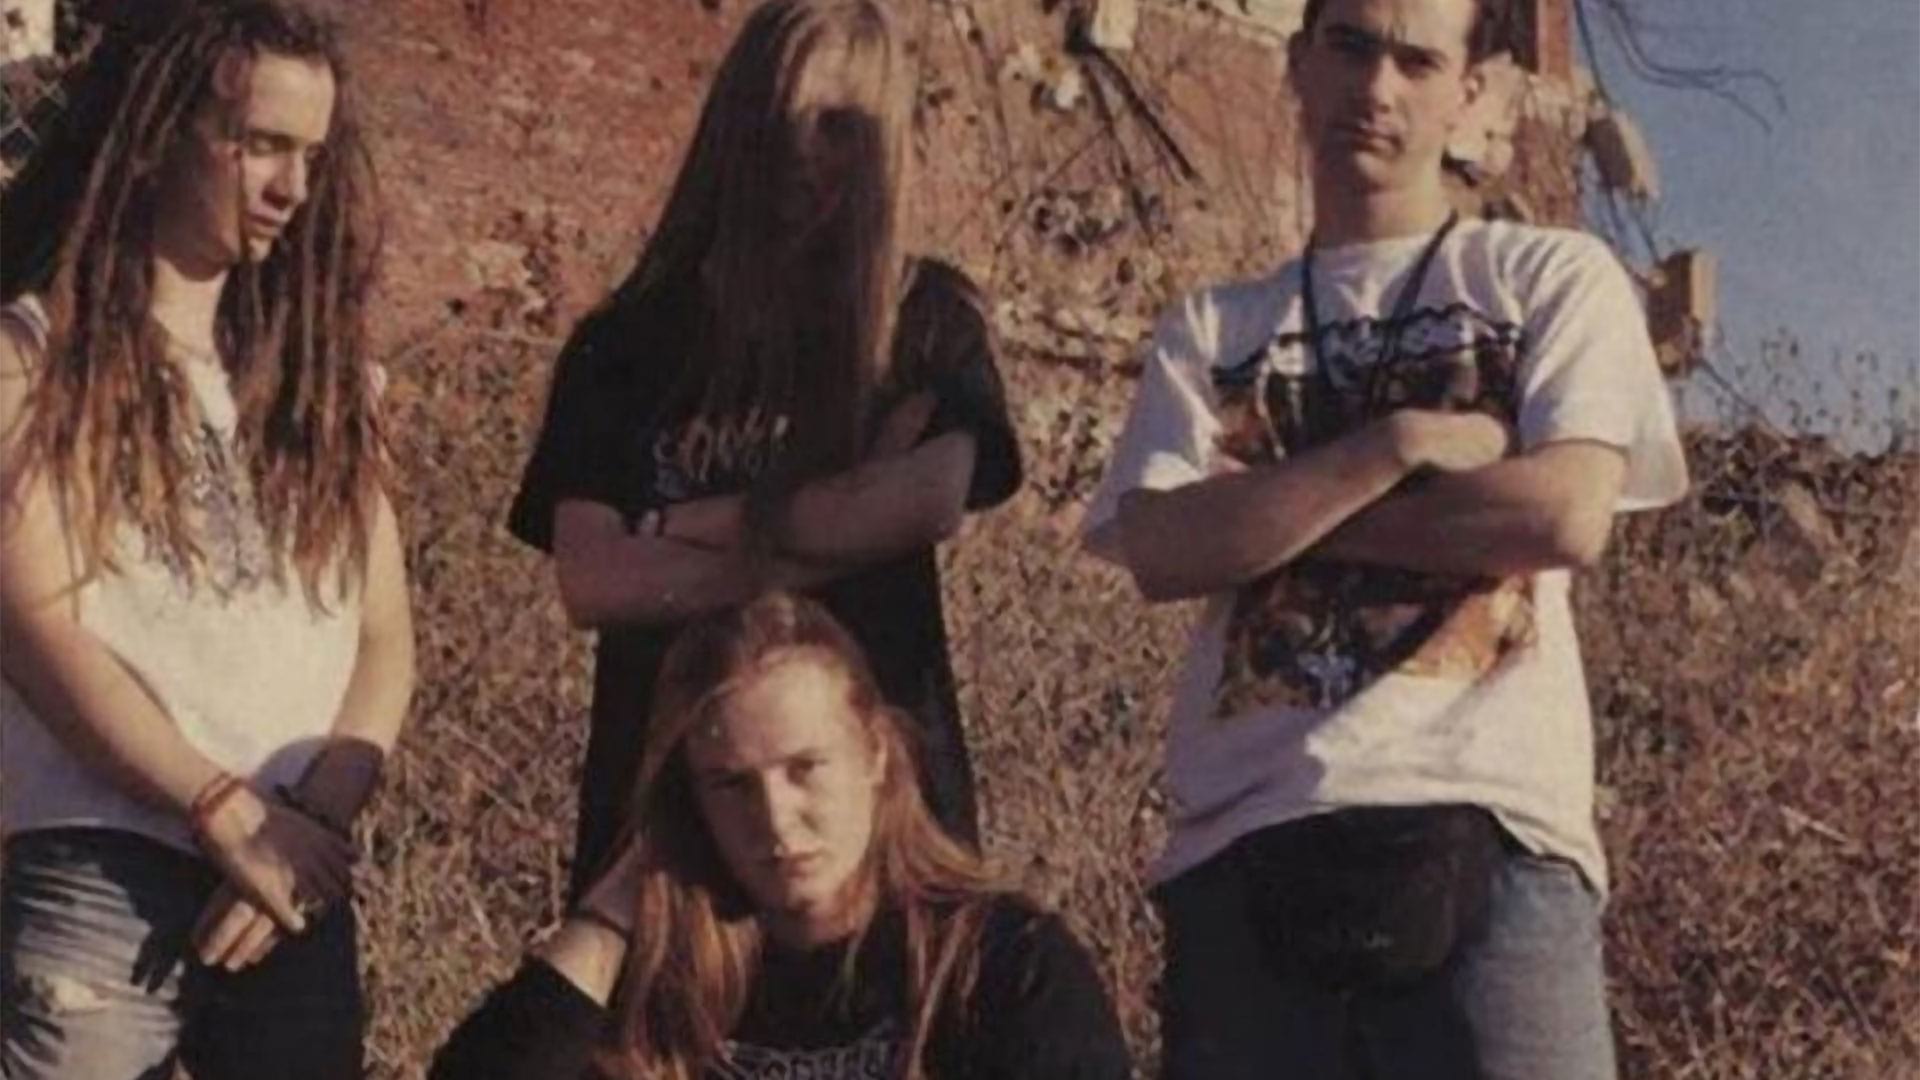 30 Years Ago: CARCASS record their second Peel session